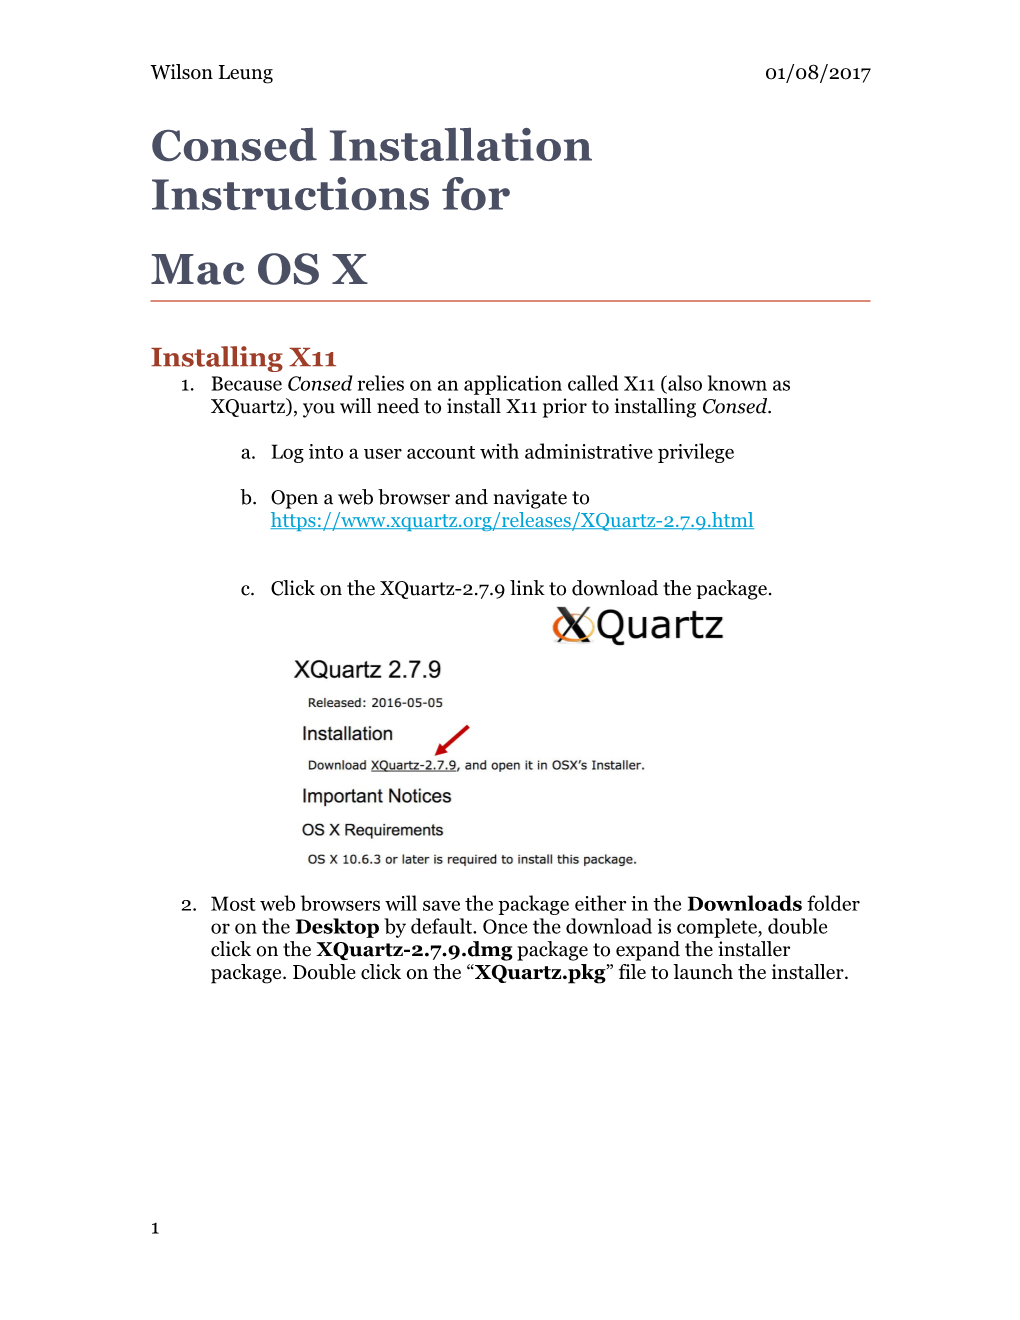 Consed Installation Instructions For